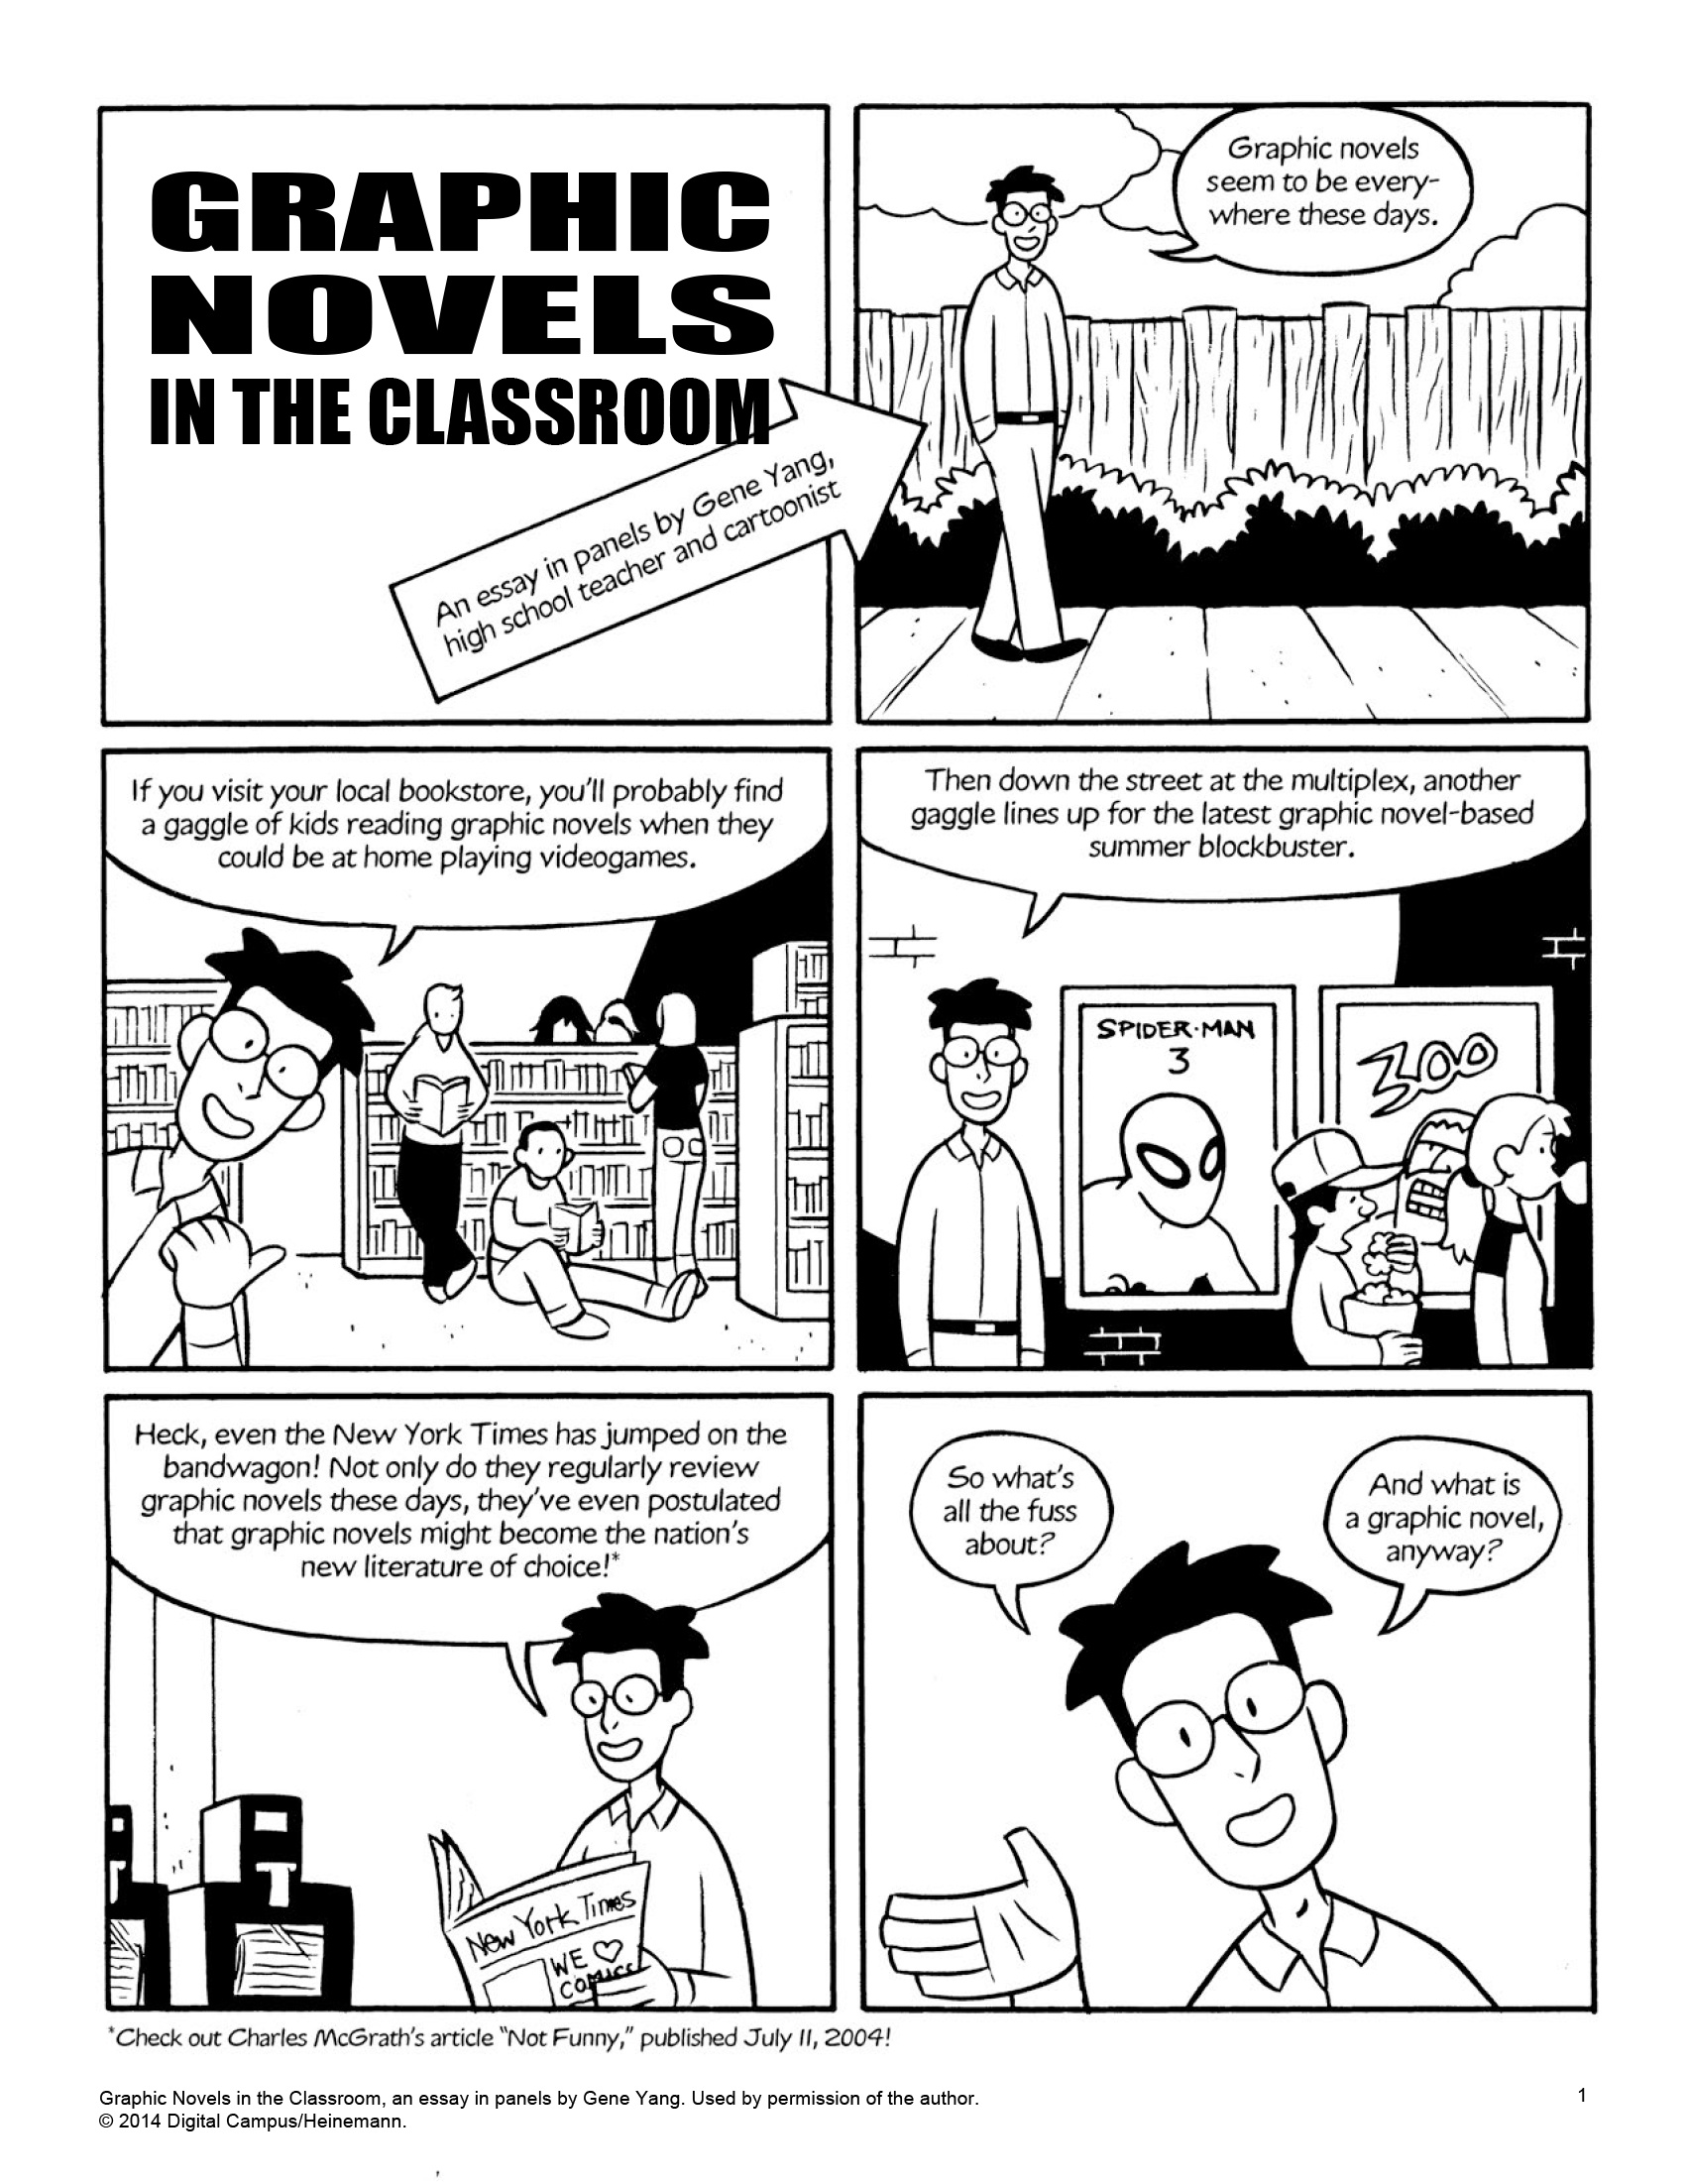 you must read graphic novels